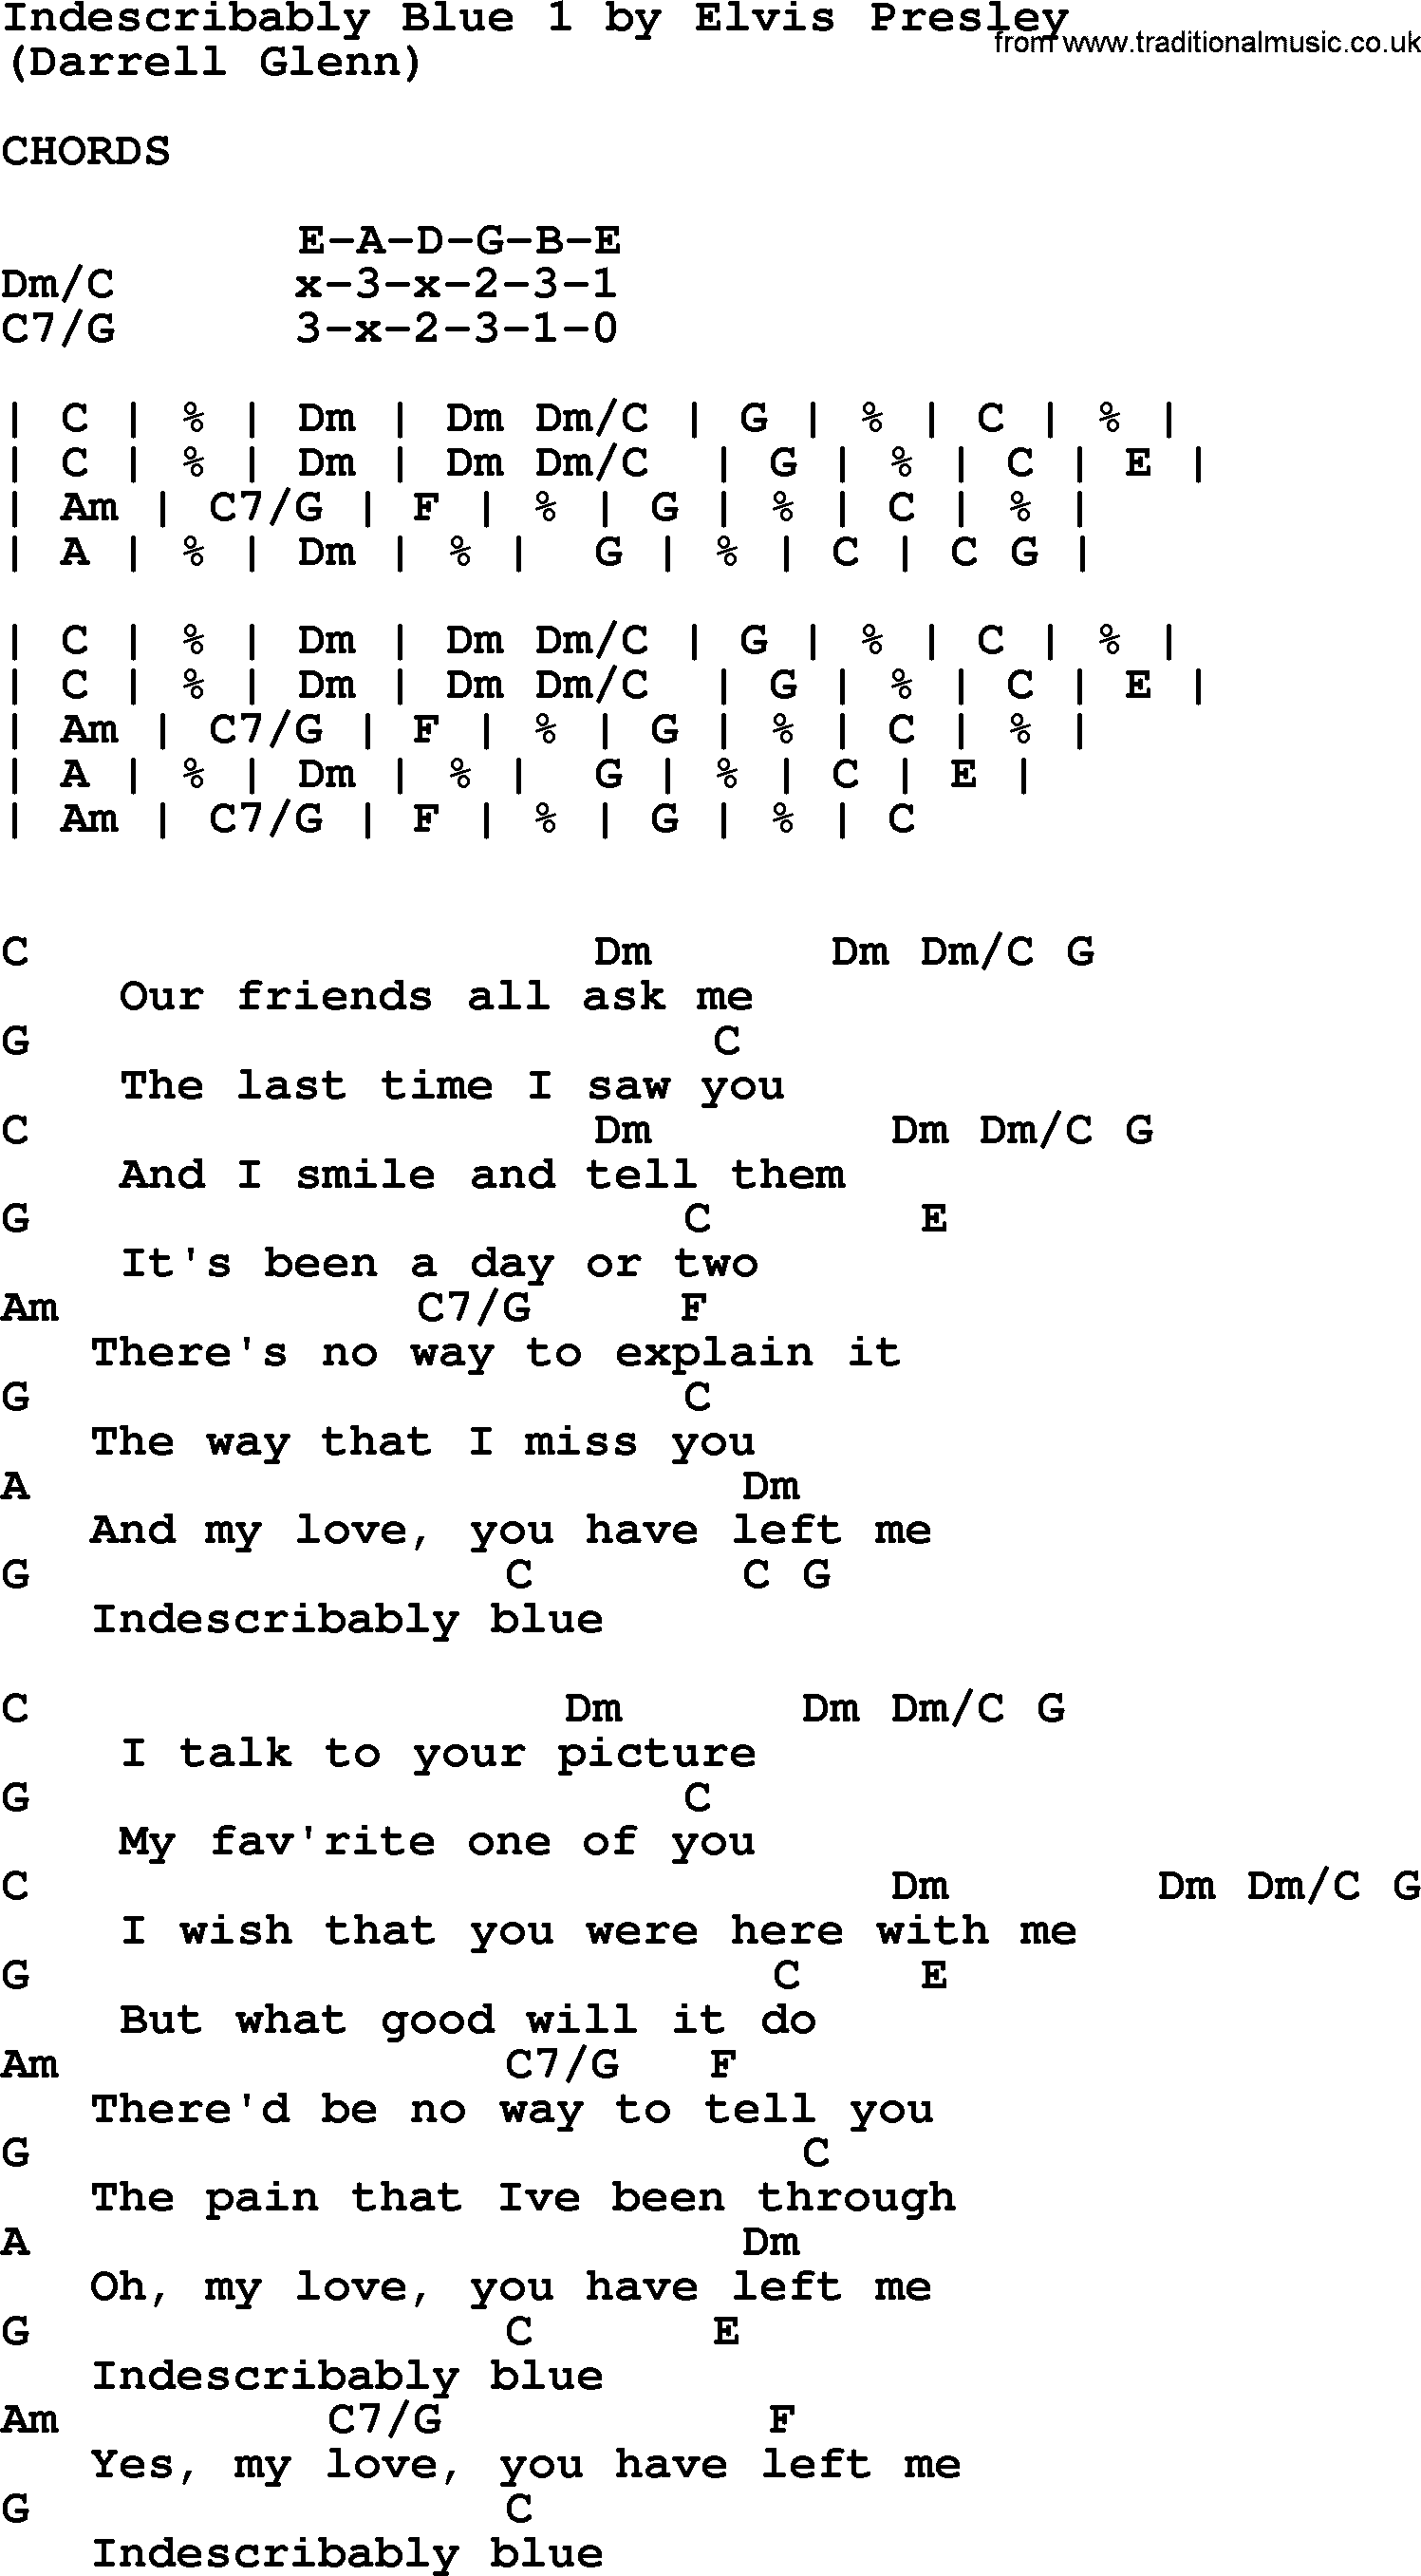 Elvis Presley song: Indescribably Blue 1, lyrics and chords